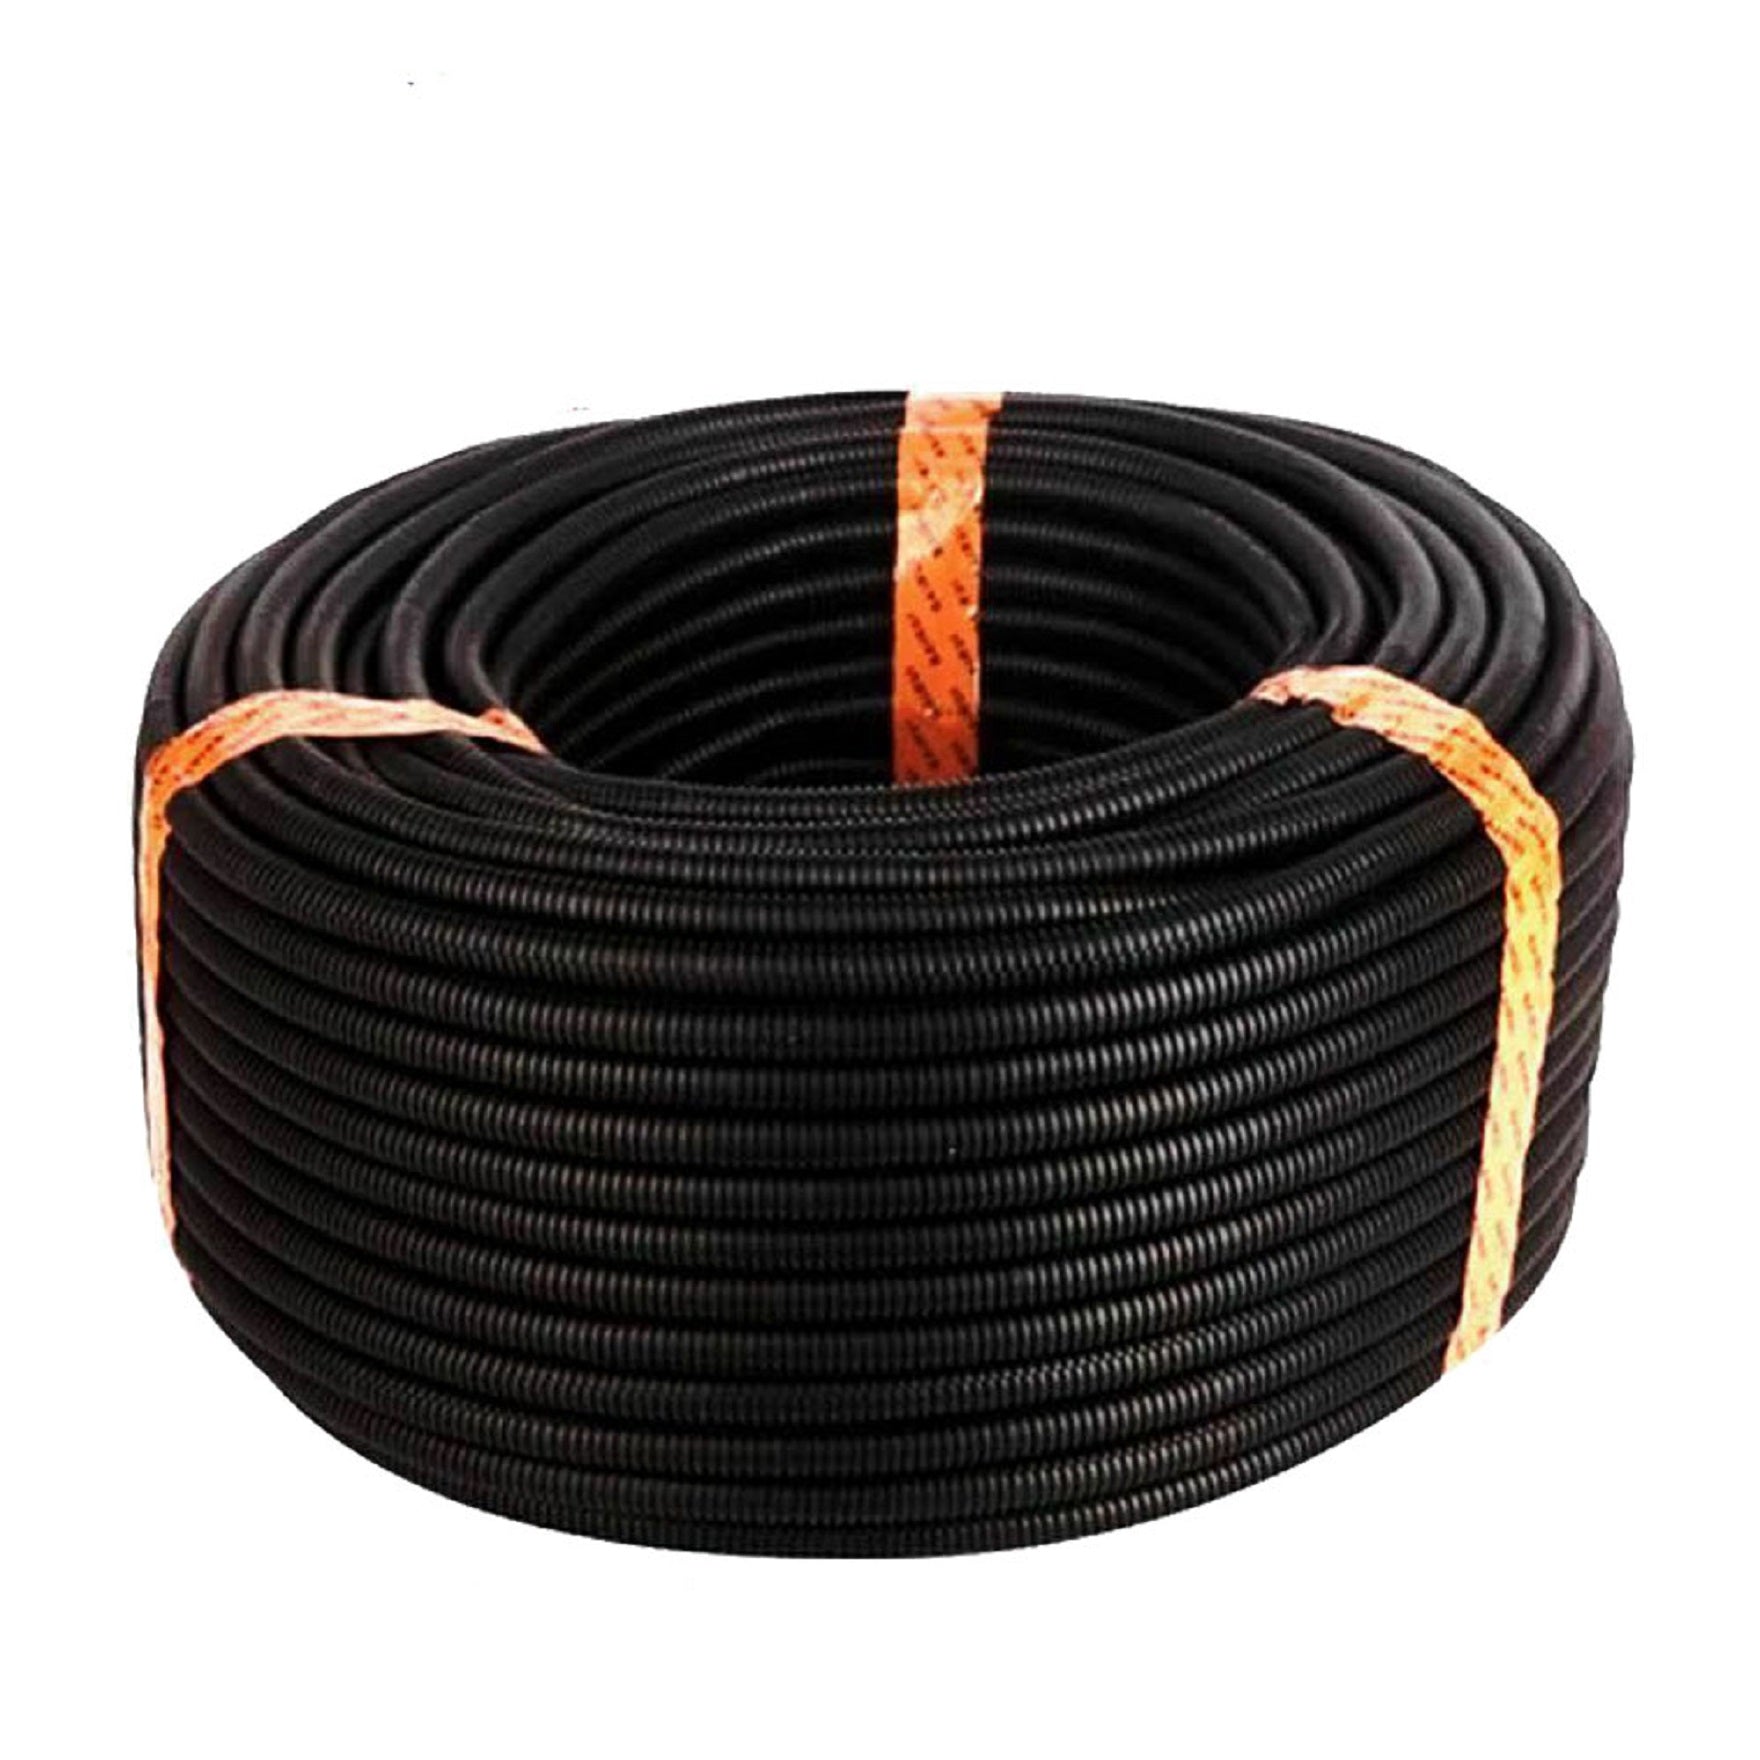 findmall Polyethylene Wire Loom Flex Tubing Cable Conduit Protective Black (32ft-1/2") FINDMALLPARTS